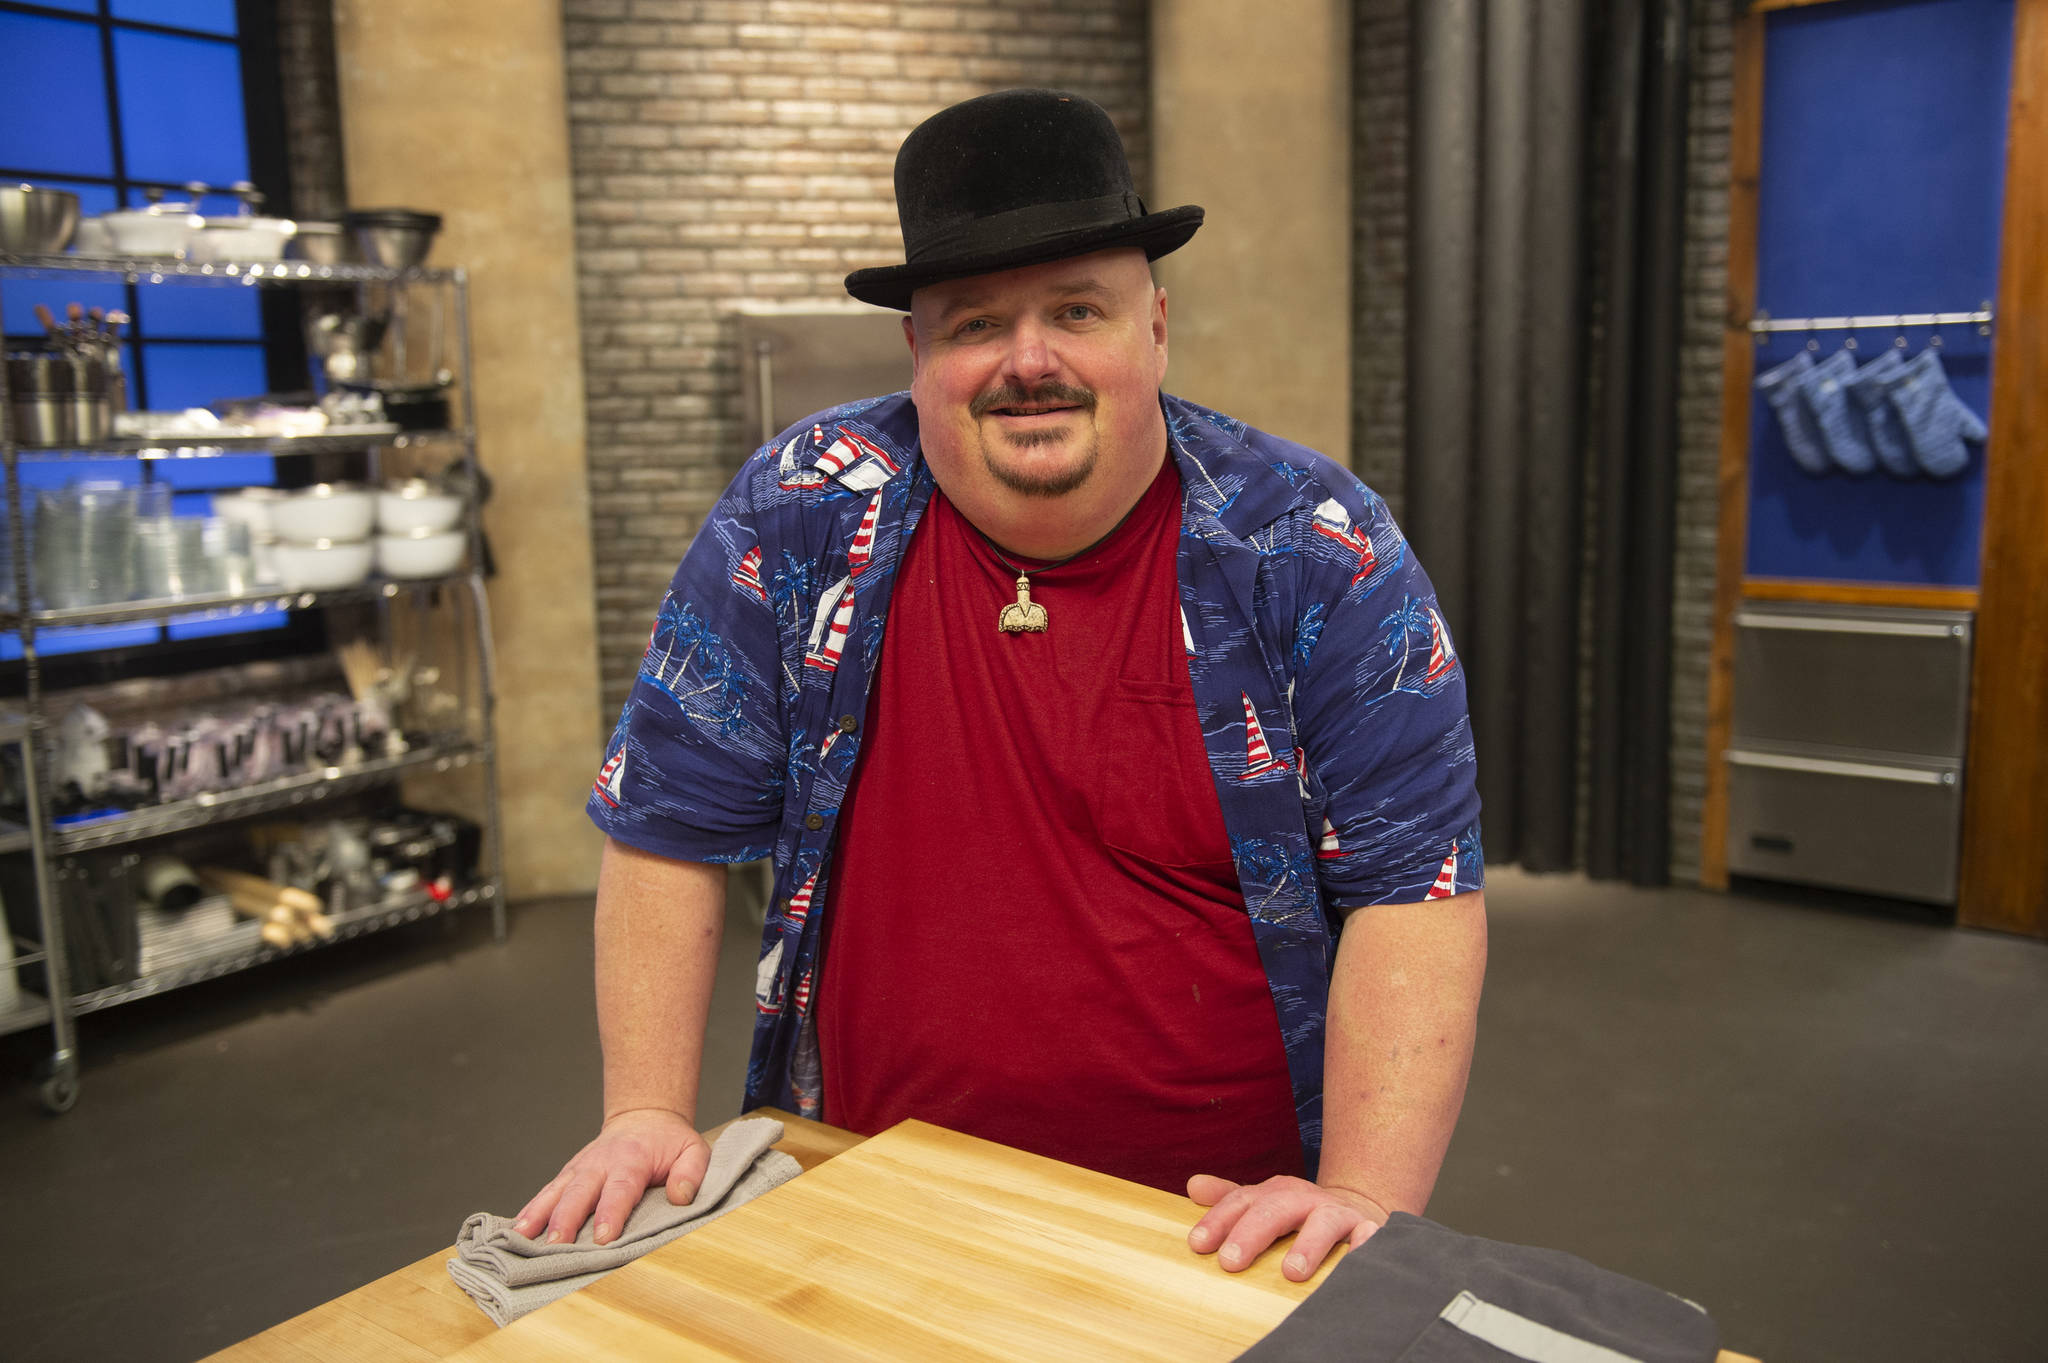 Ninilchik man competes on Food Network’s ‘Worst Cooks in America’